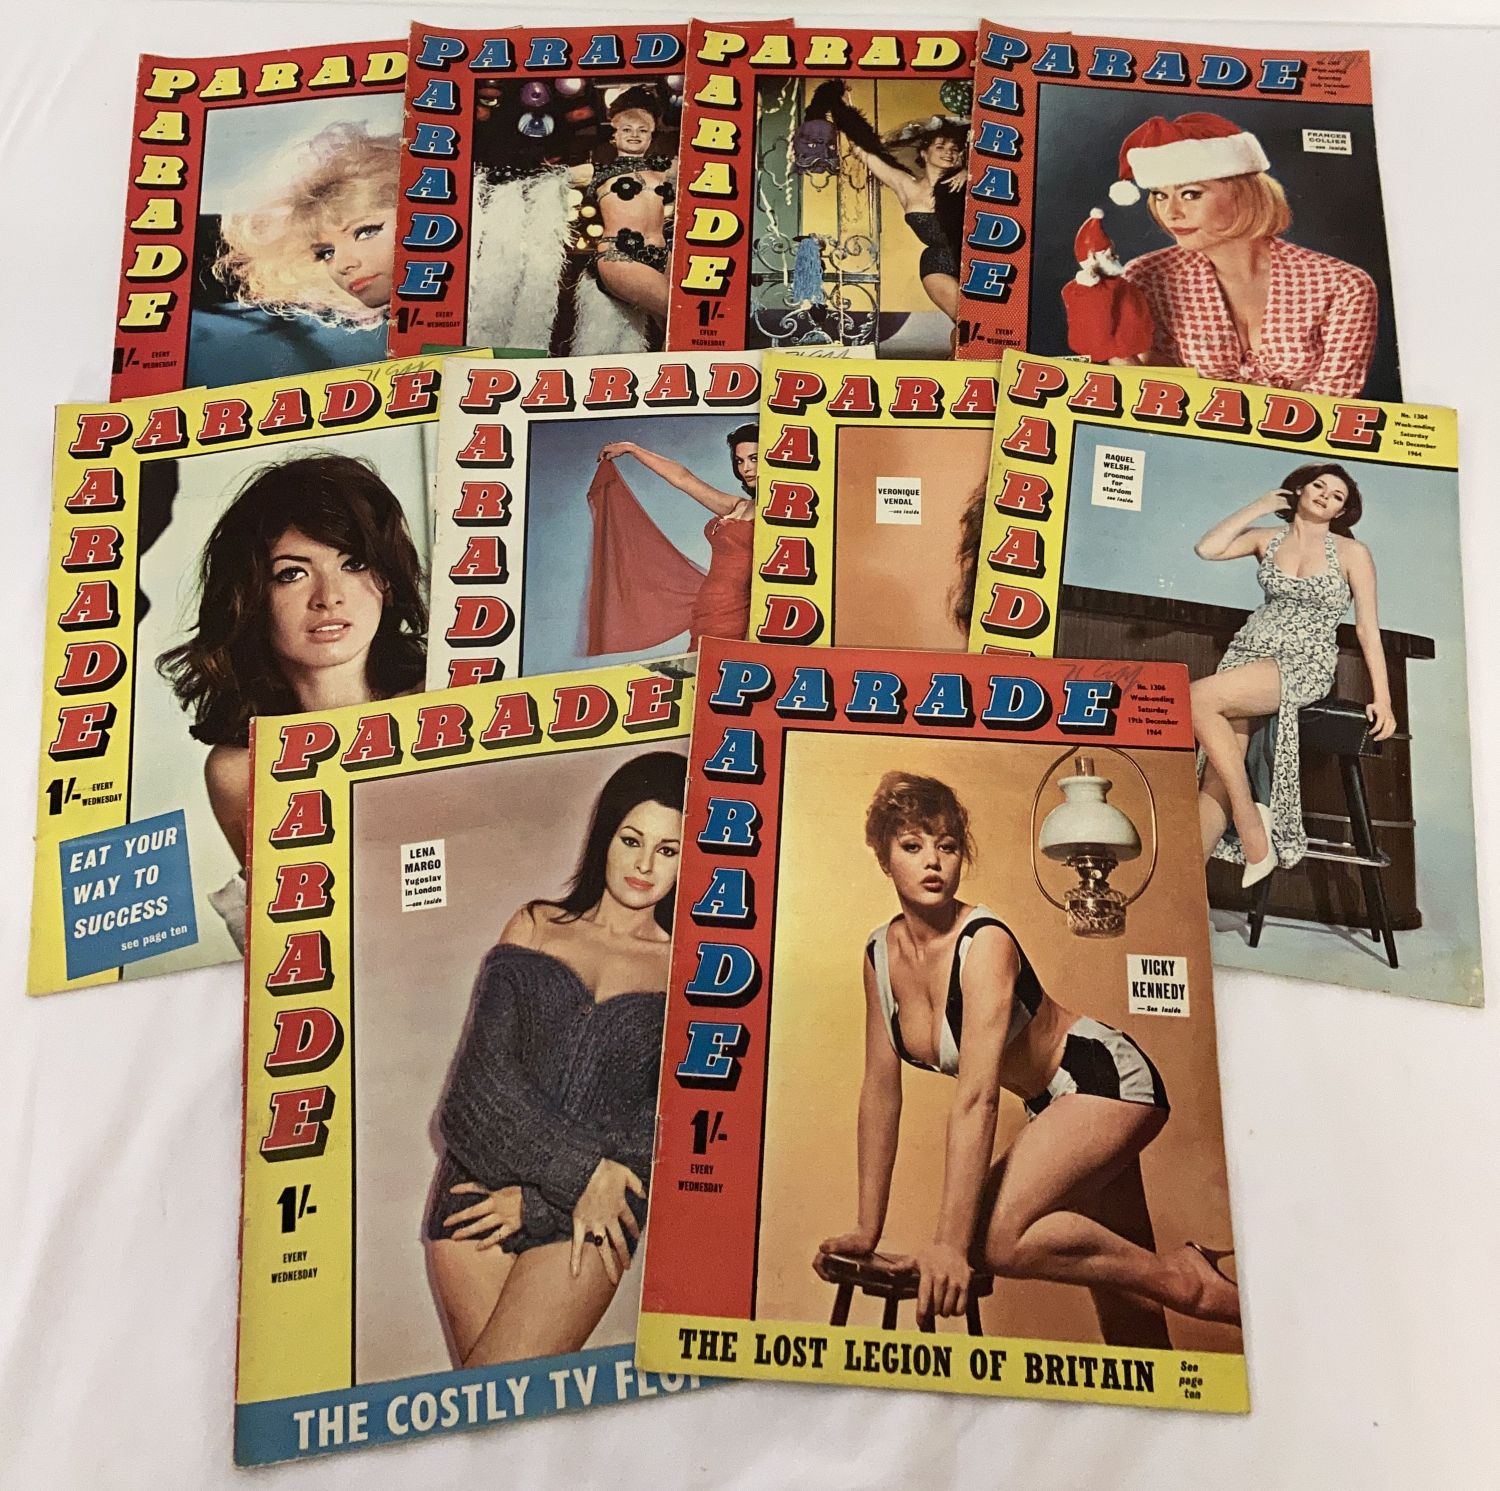 10 vintage 1960's issues of Parade, adult erotic magazine, dating from 1964 - 5.